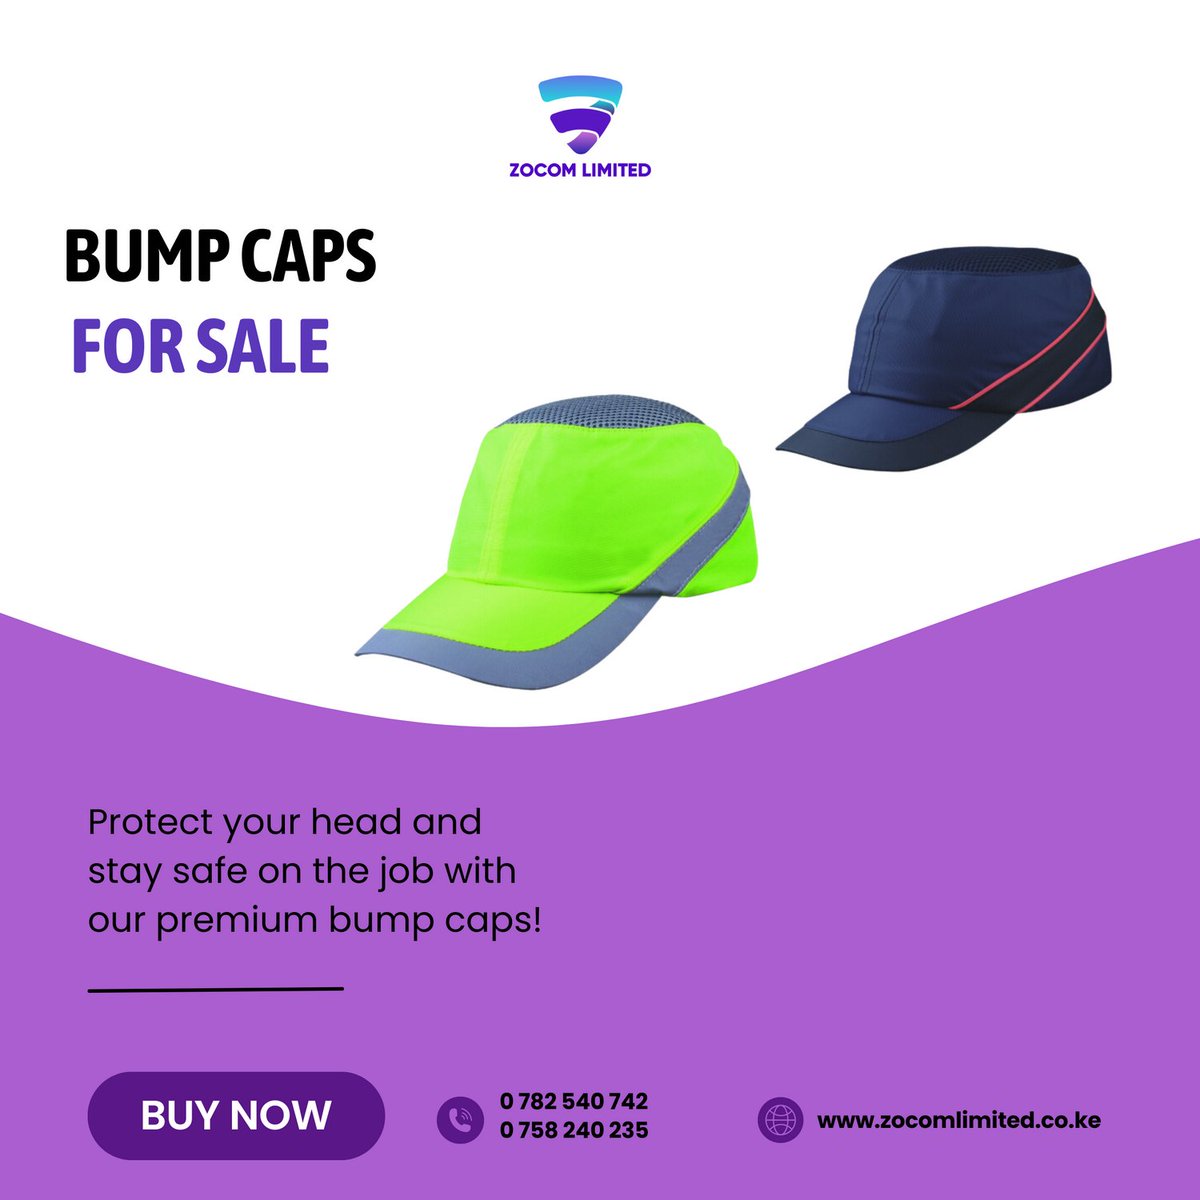 With an adjustable strap, our one-size-fits-most design guarantees a perfect fit for everyone.

#BumpCapSafety #HeadProtection #ConstructionSafety #SafetyFirst #Workwear #StaySafe #ProtectiveGear #HardHatHero #BePrepared #SafetyGear